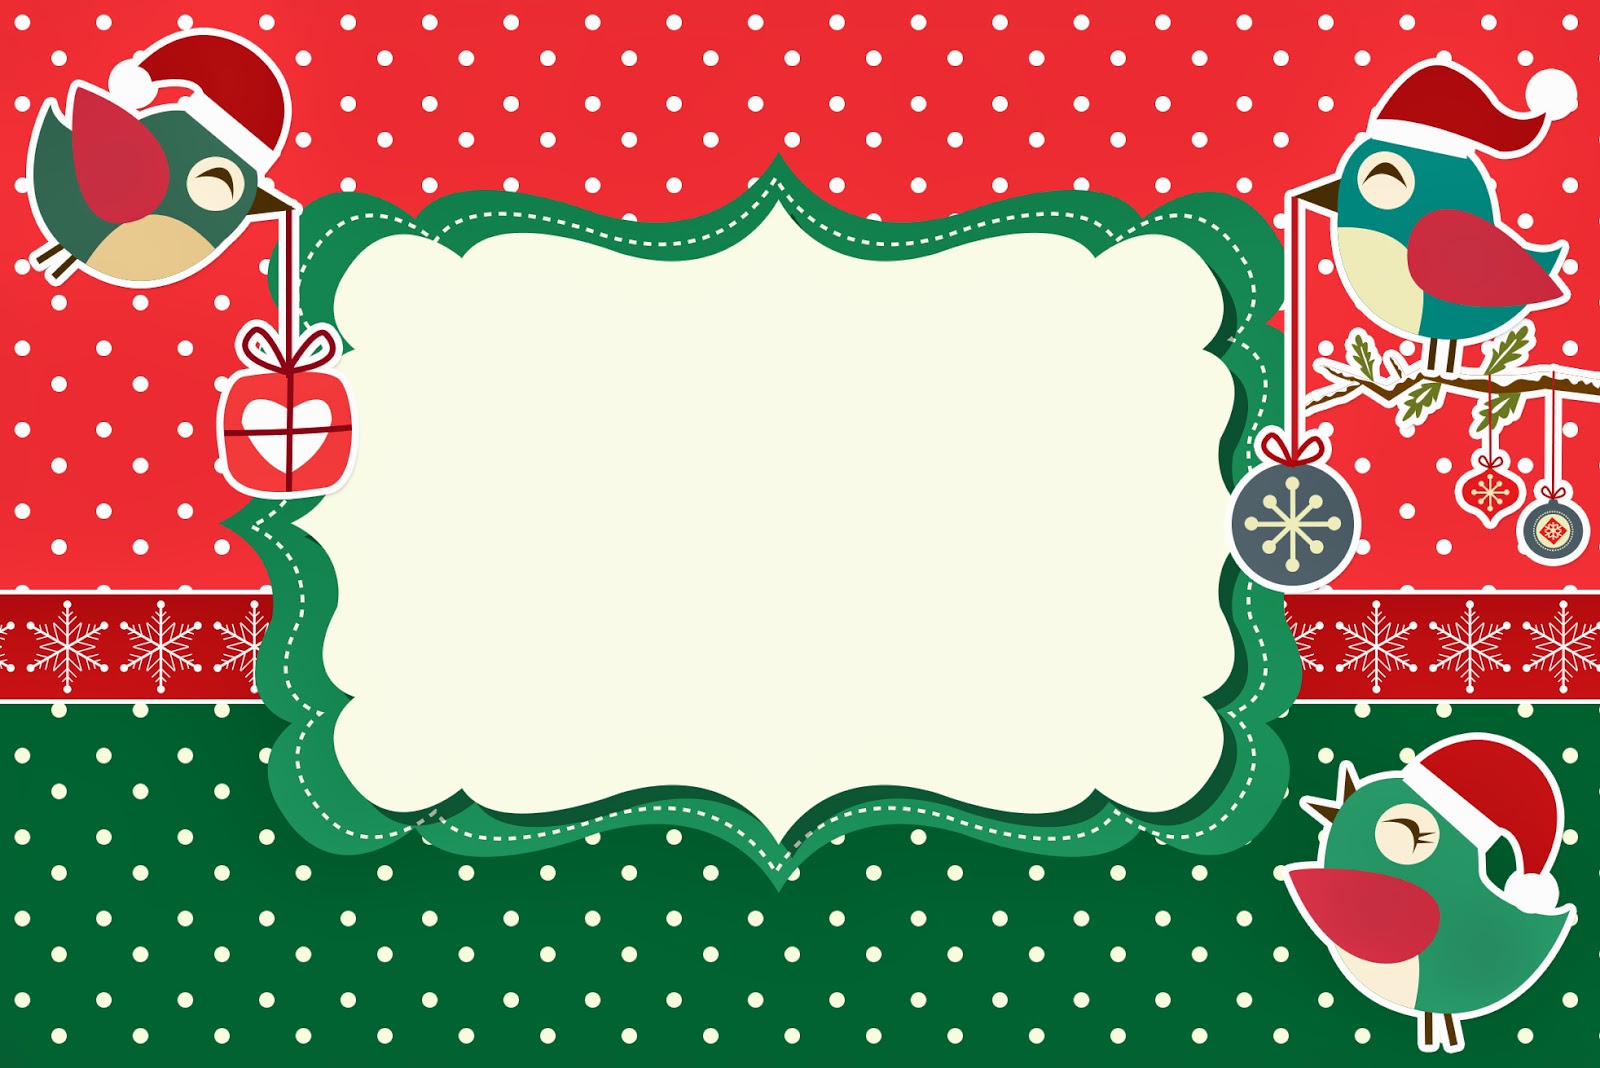 Christmas Birds: Free Printable Invitations or Cards. - Oh My Fiesta